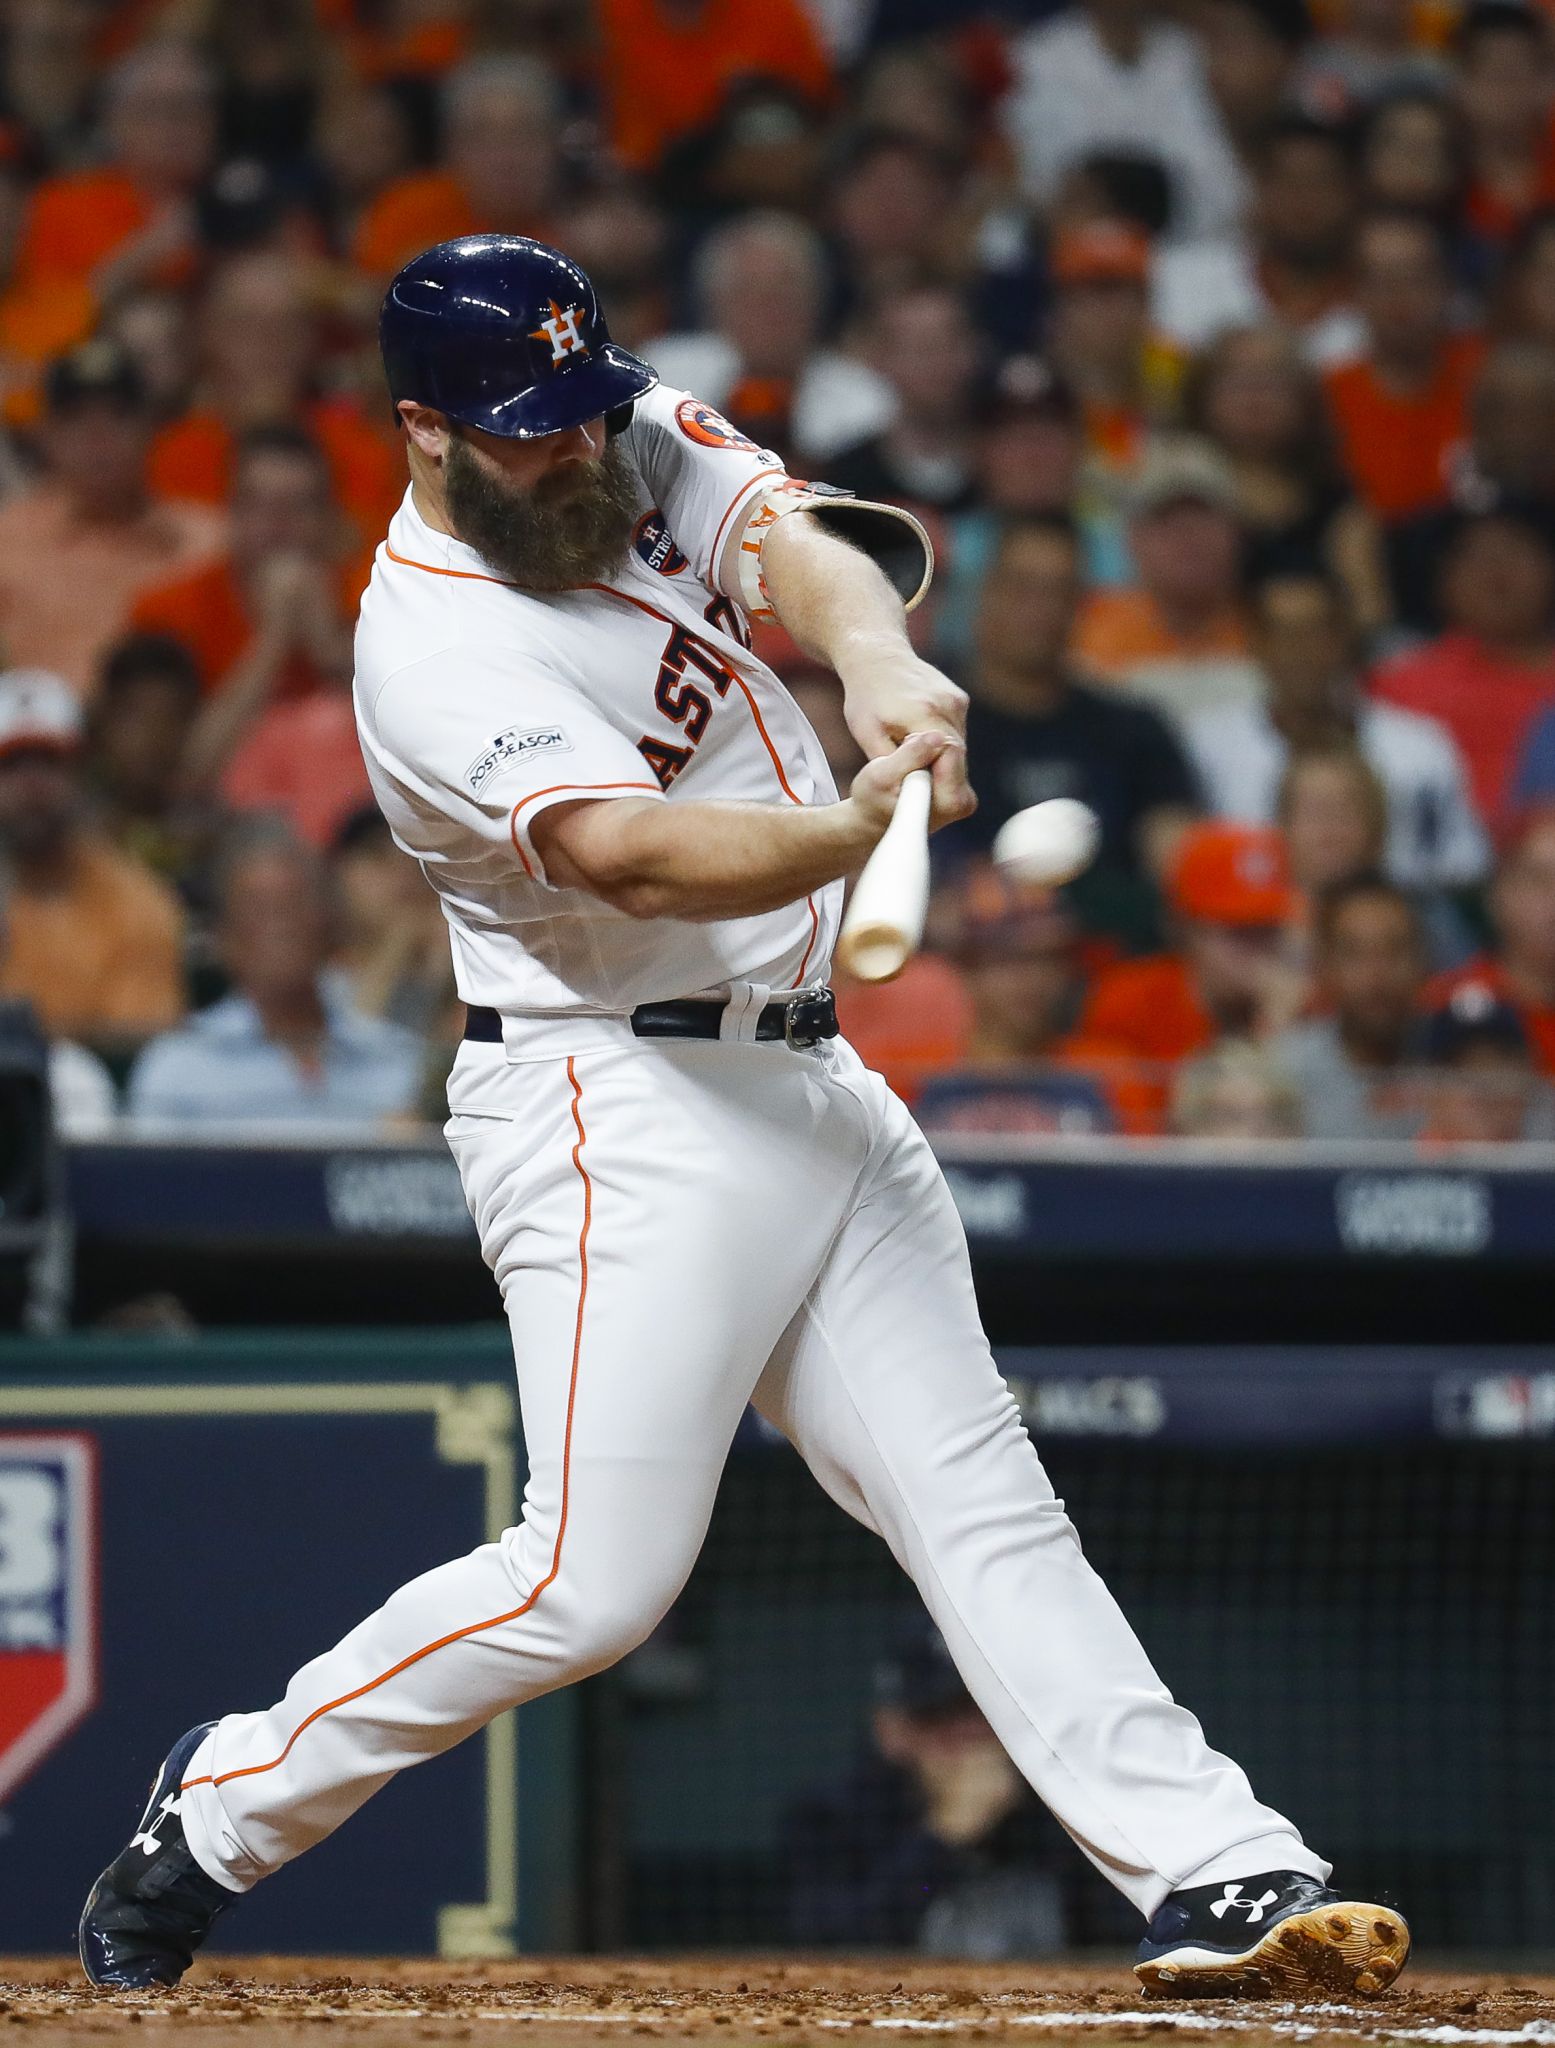 Evan Gattis Won World Series With Astros After Working As Janitor